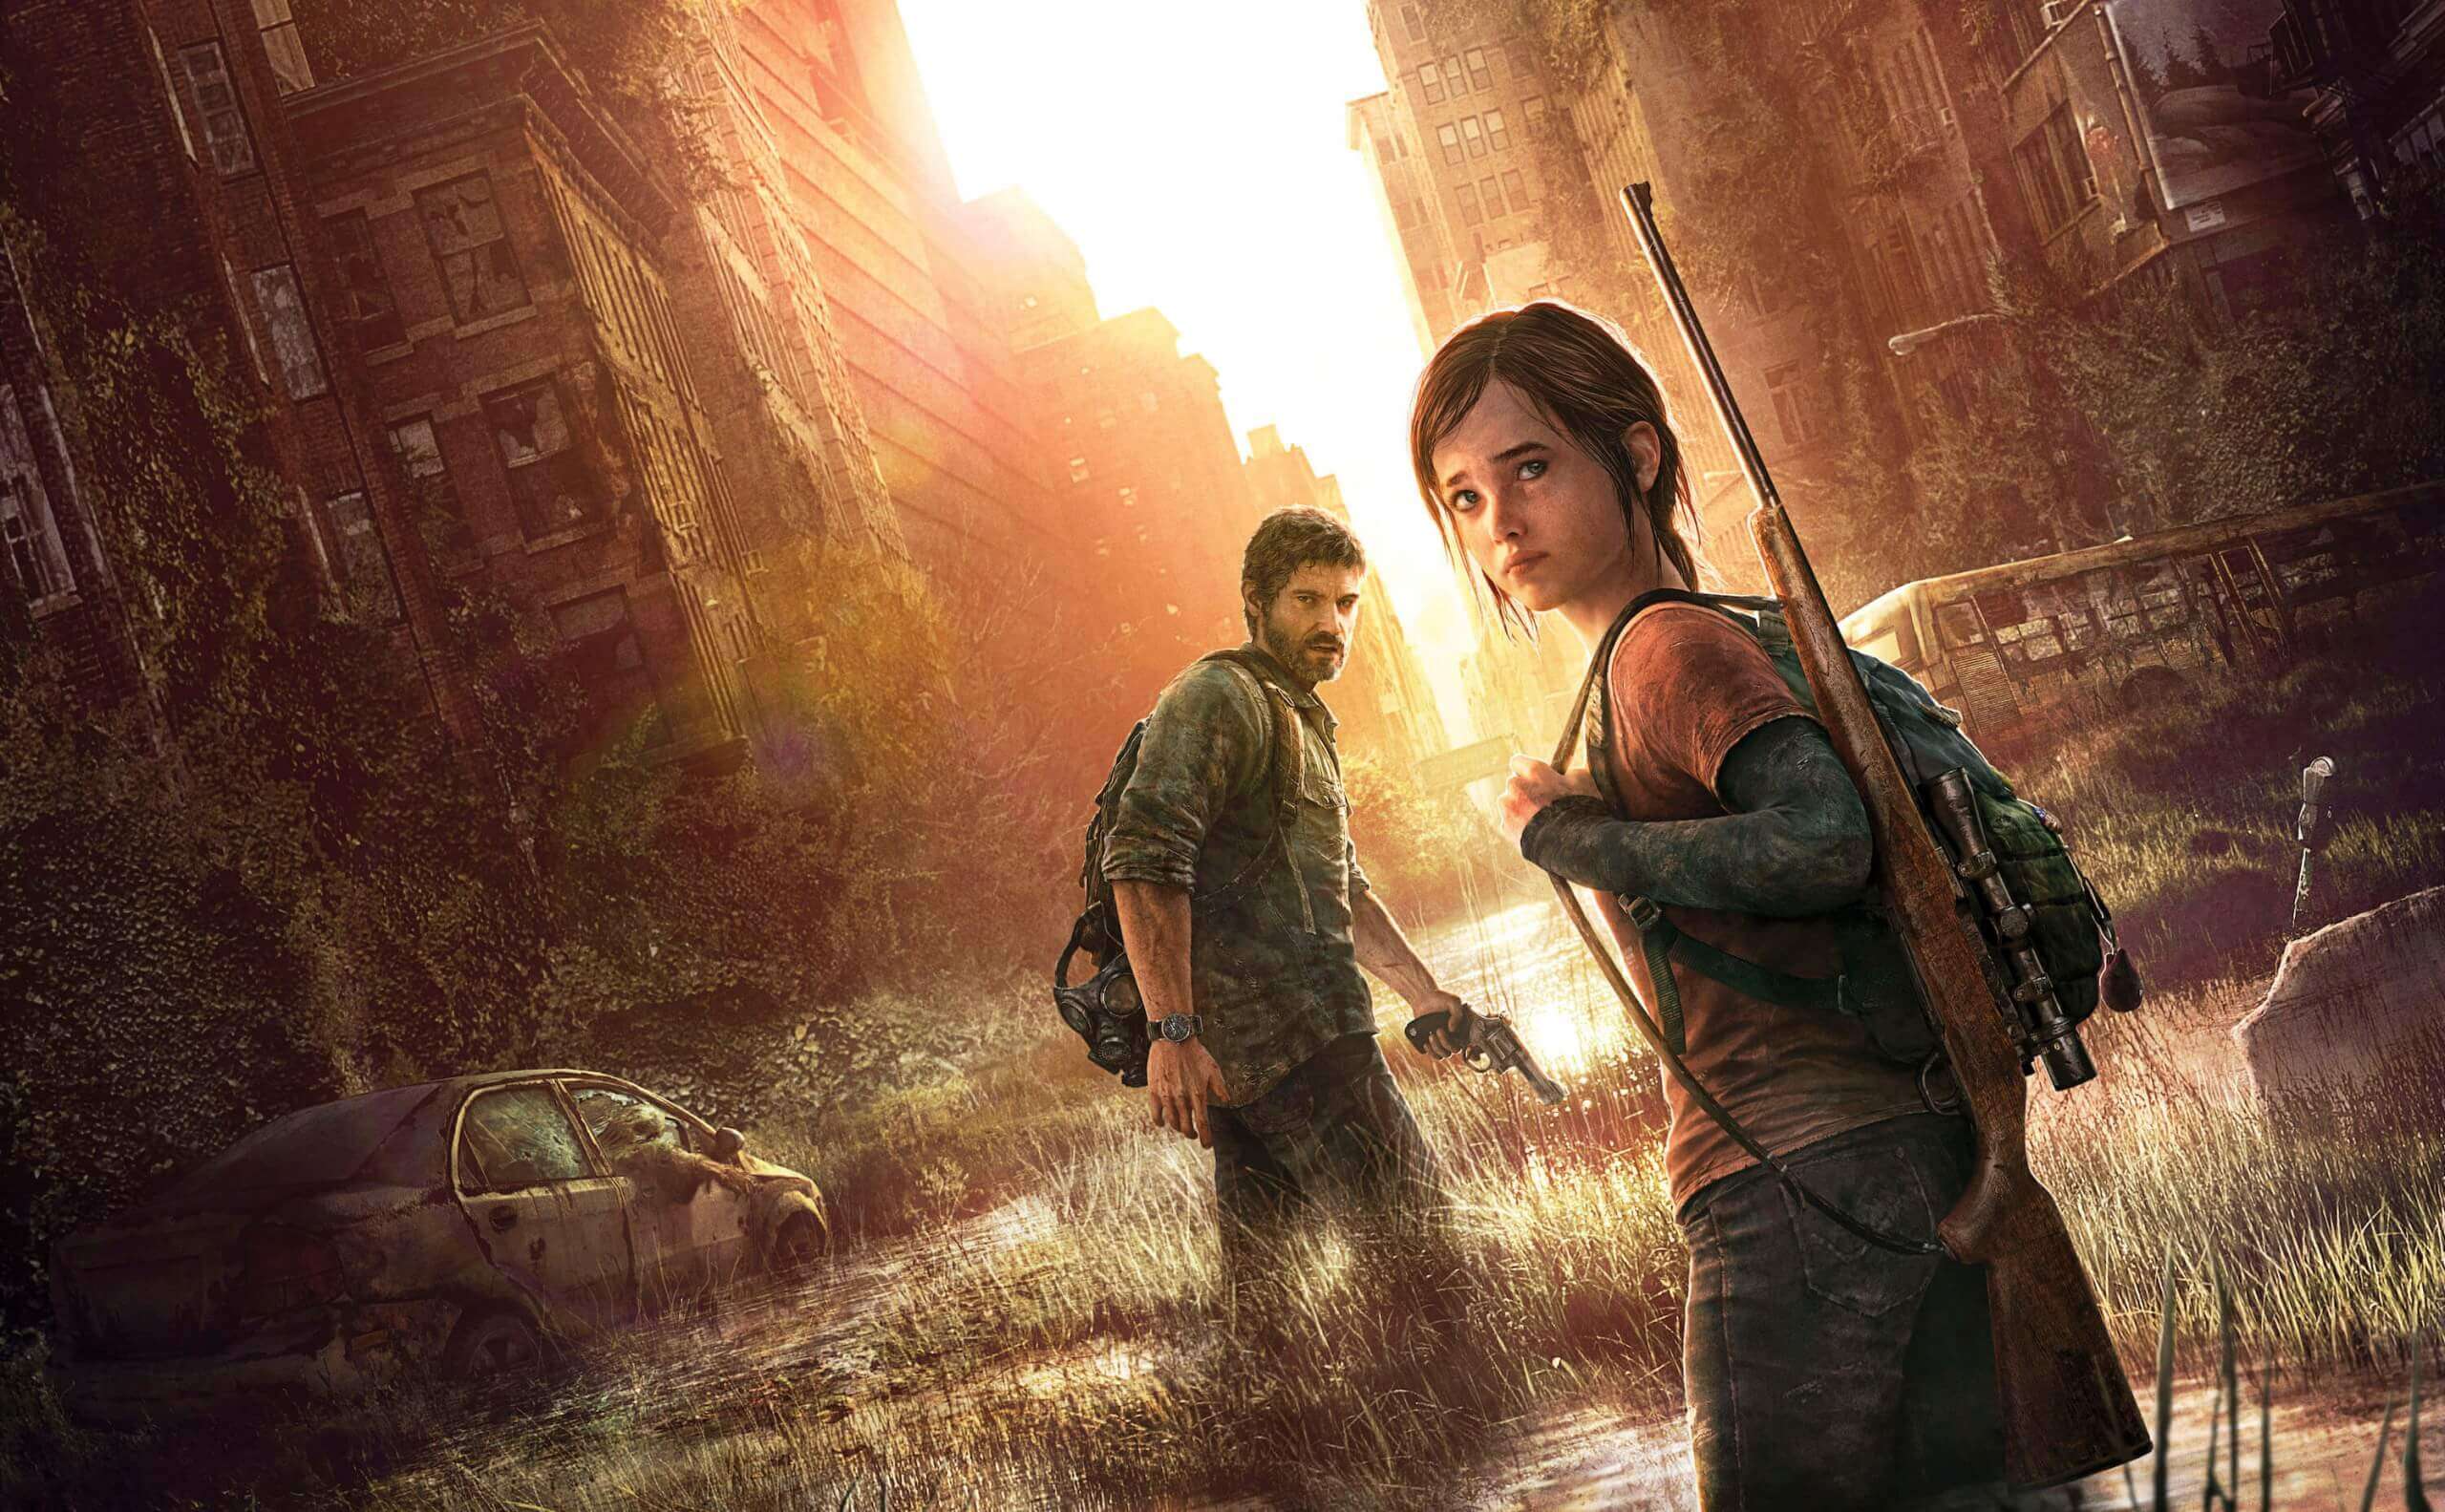 Chernobyl director Johan Renck is working on the pilot episode of HBO's The Last of Us